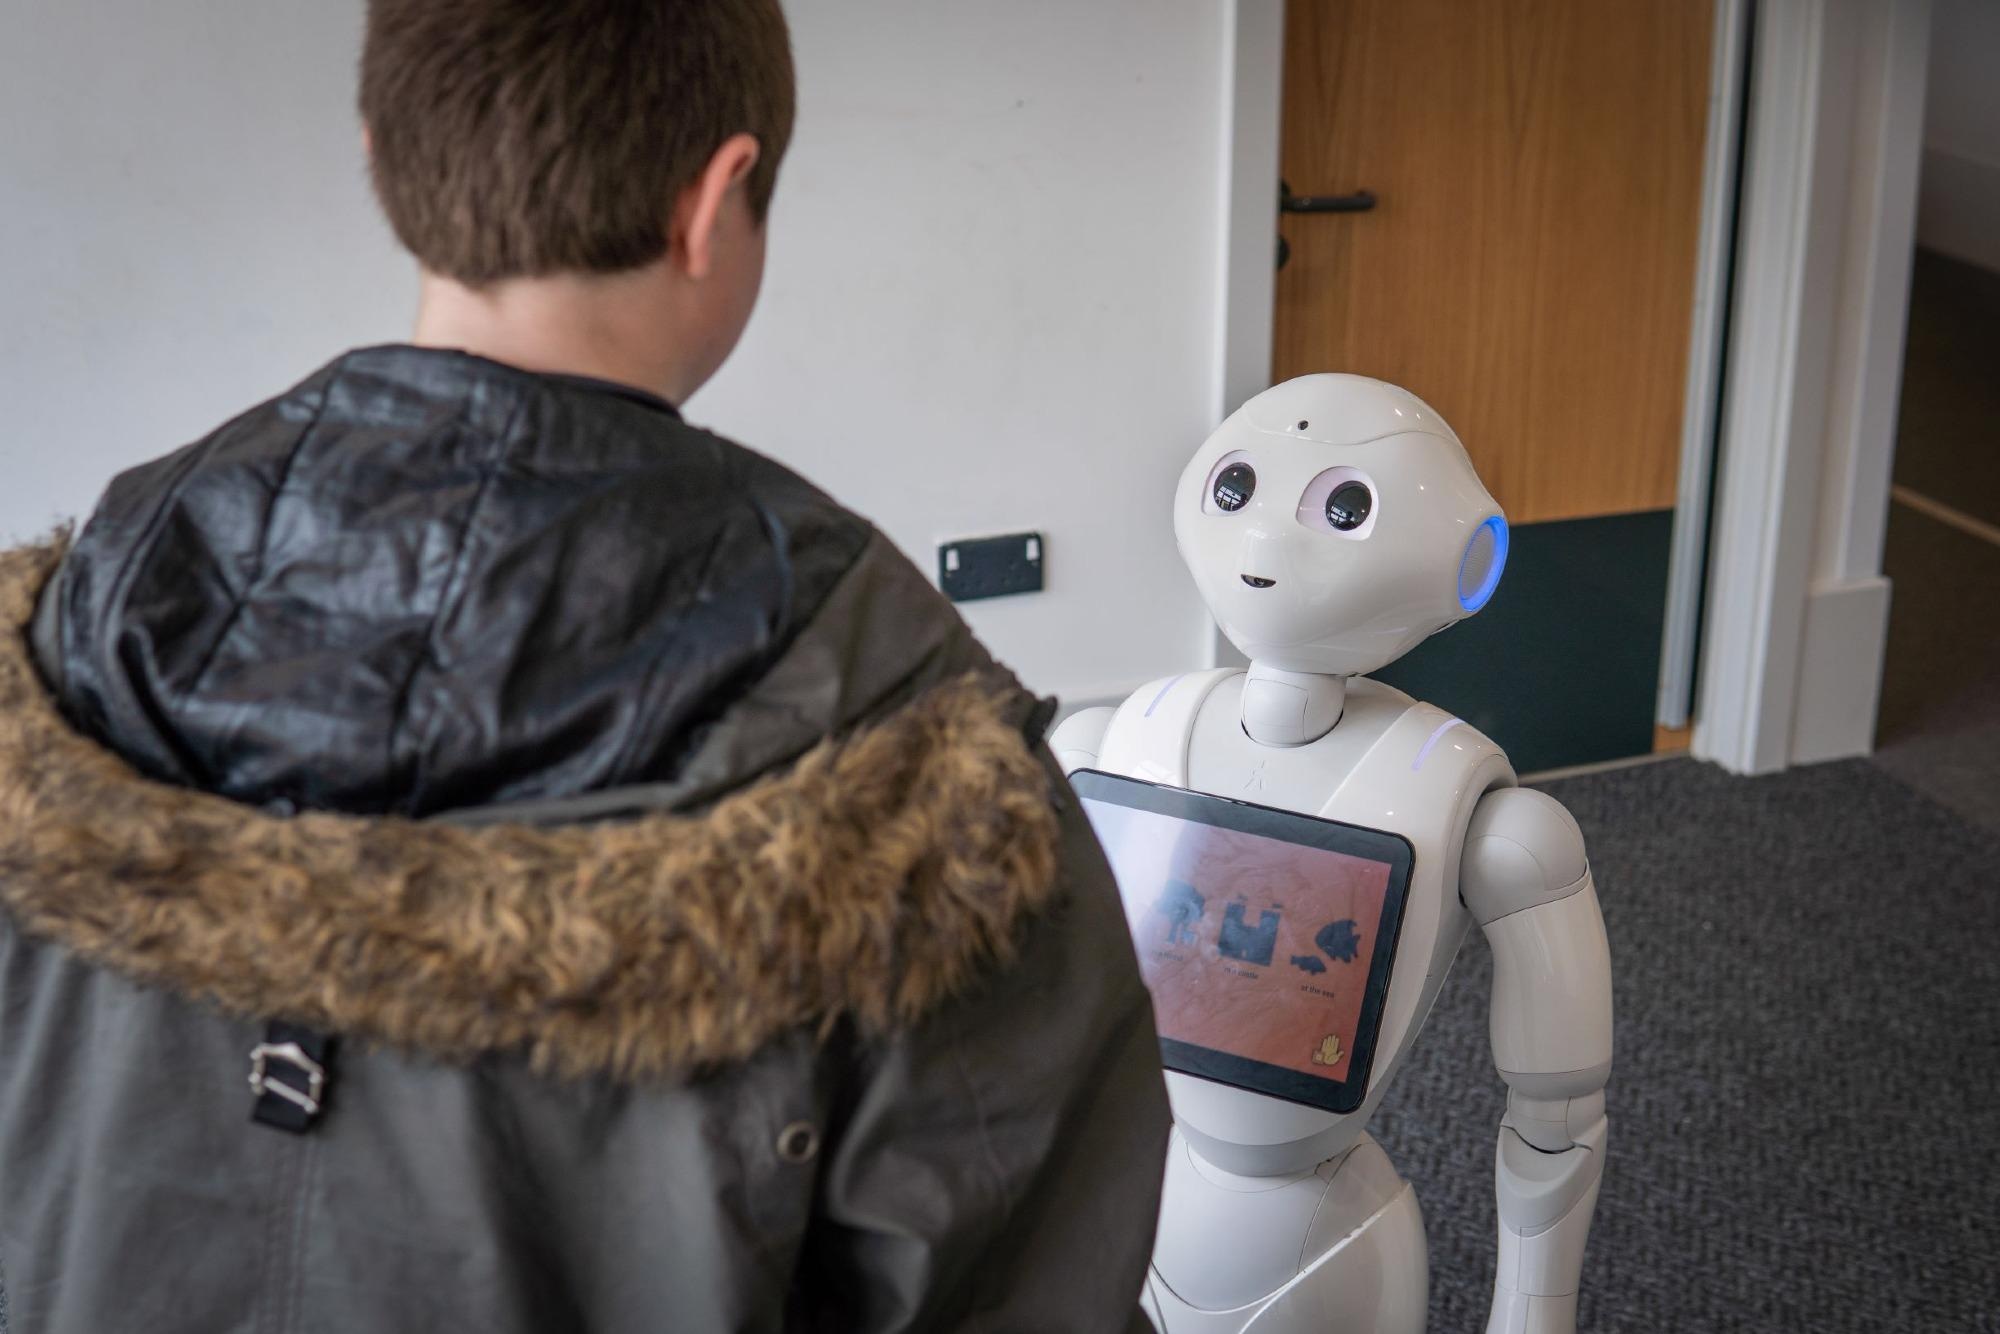 Pepper the Robot Joins School to Support Autistic Young People